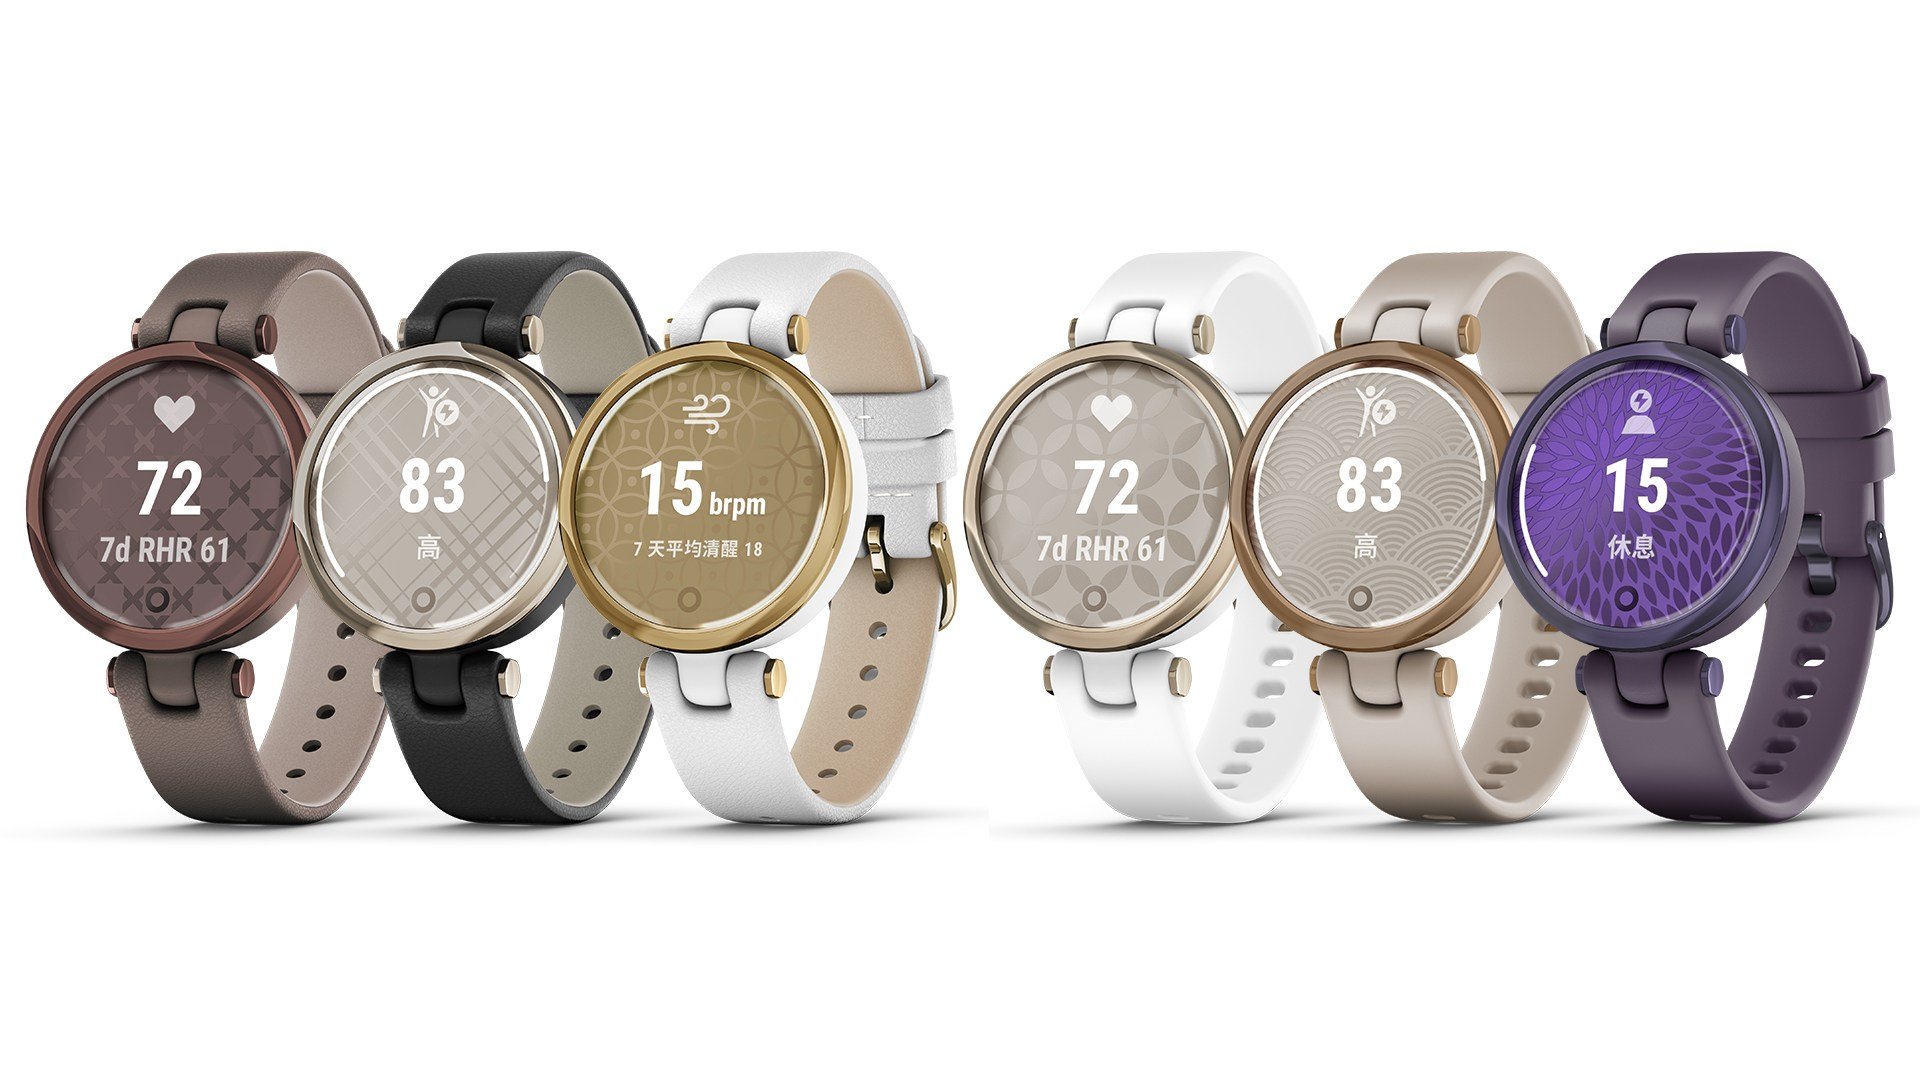 The Garmin Lily series of smartwatches is targeted at women